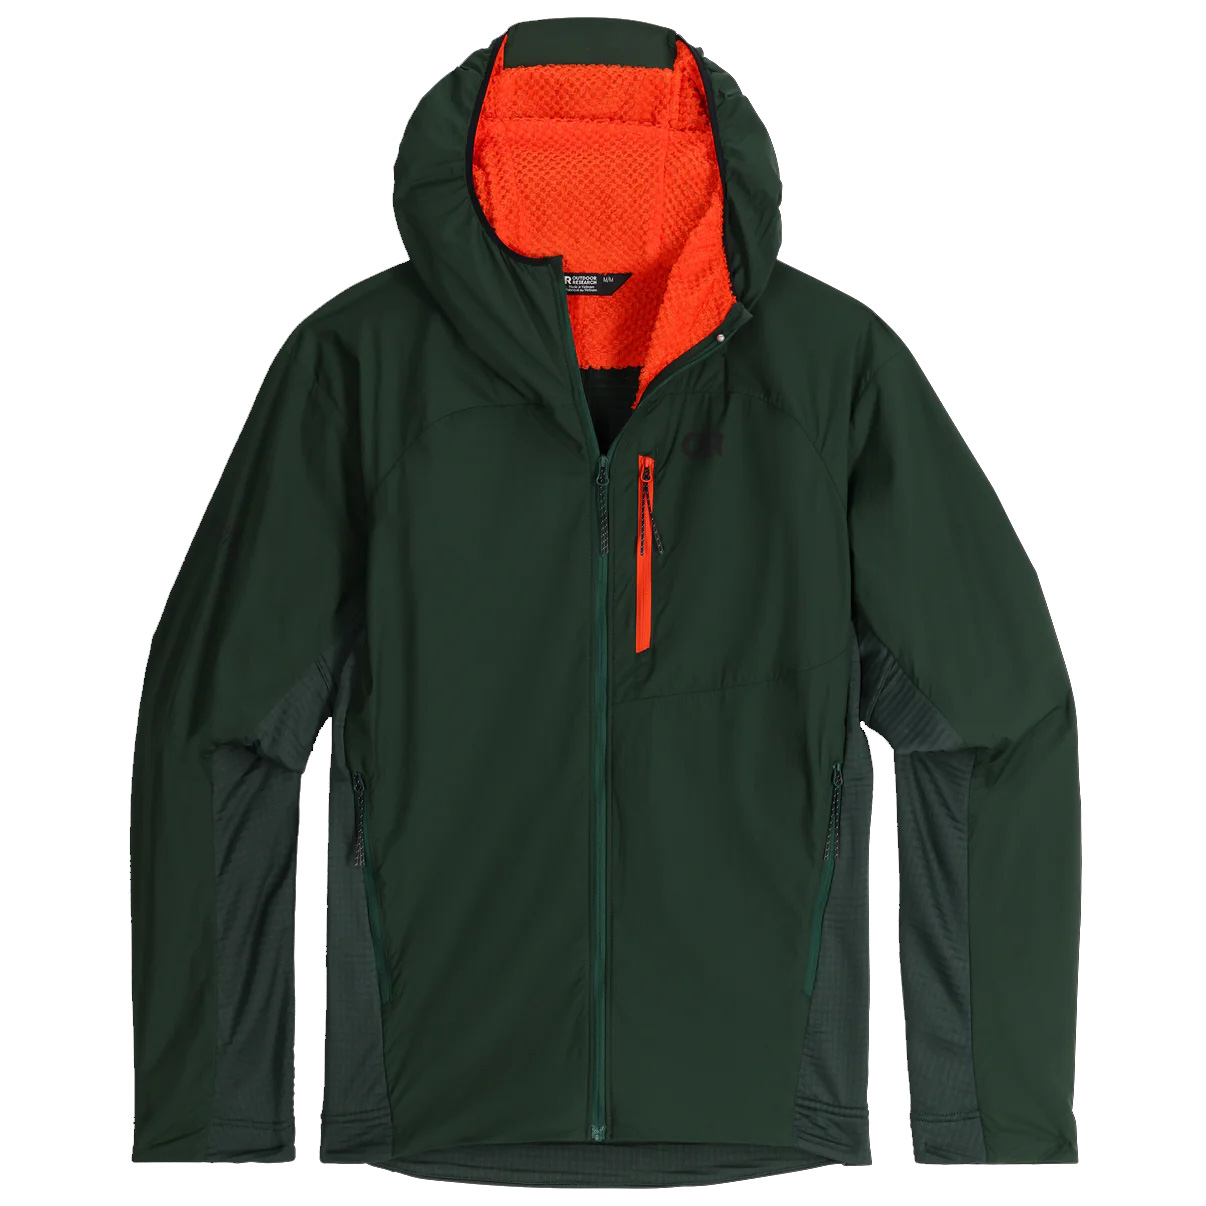 David Golay reviews the Outdoor Research Deviator Hoodie for BLISTER.